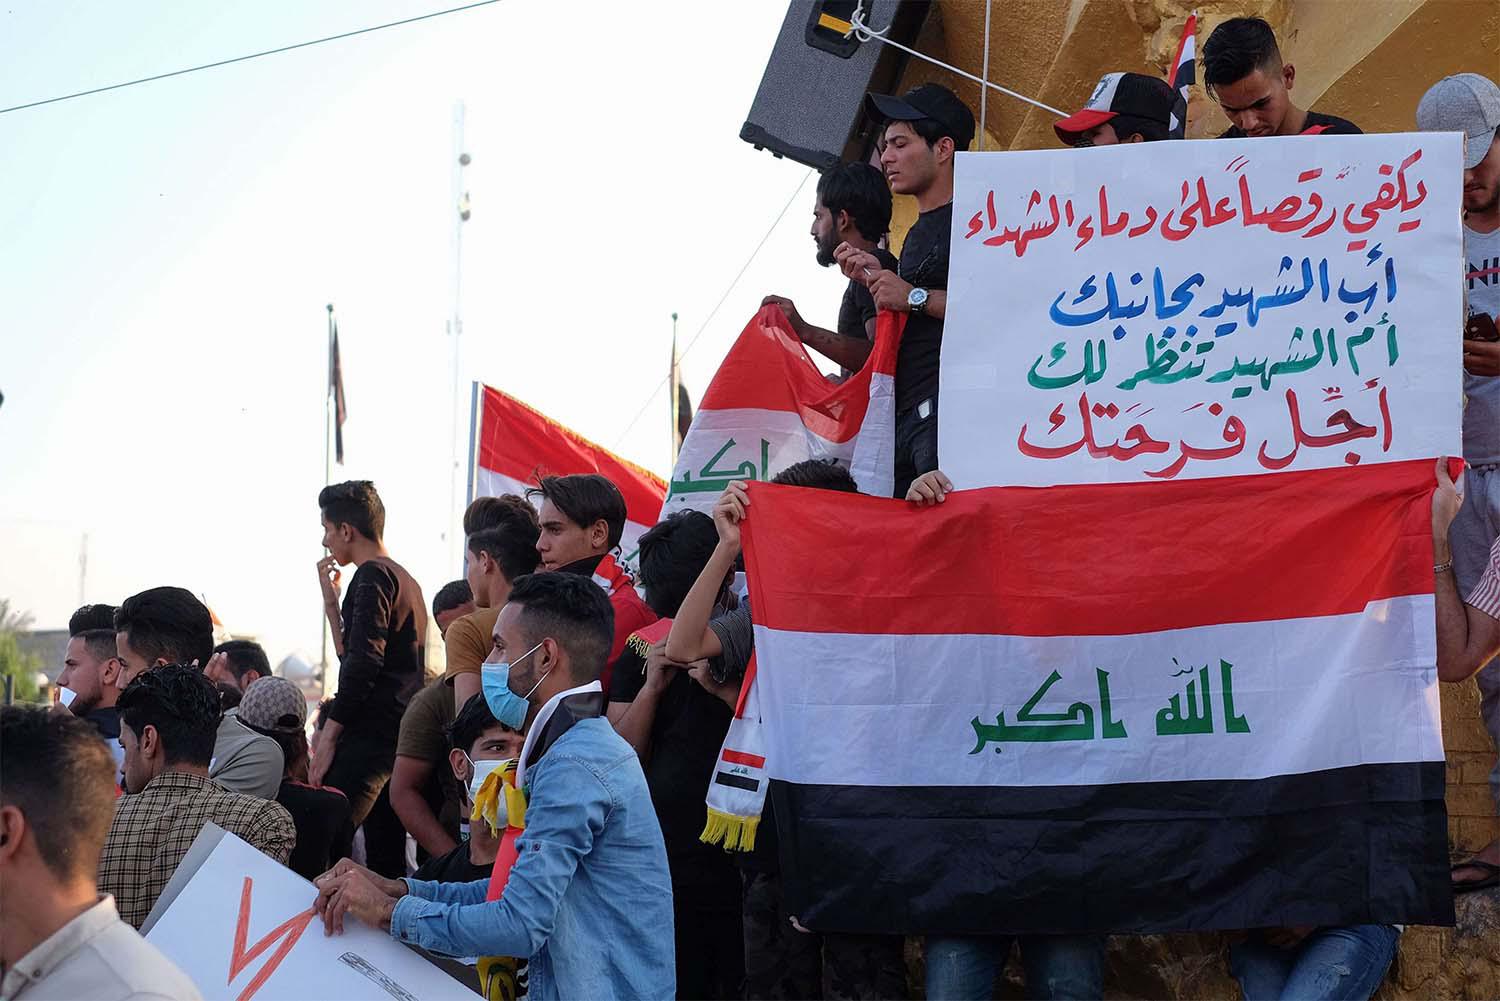 Protesters have directed their rage at Iran and the powerful Iraqi Shiite militias tied to it